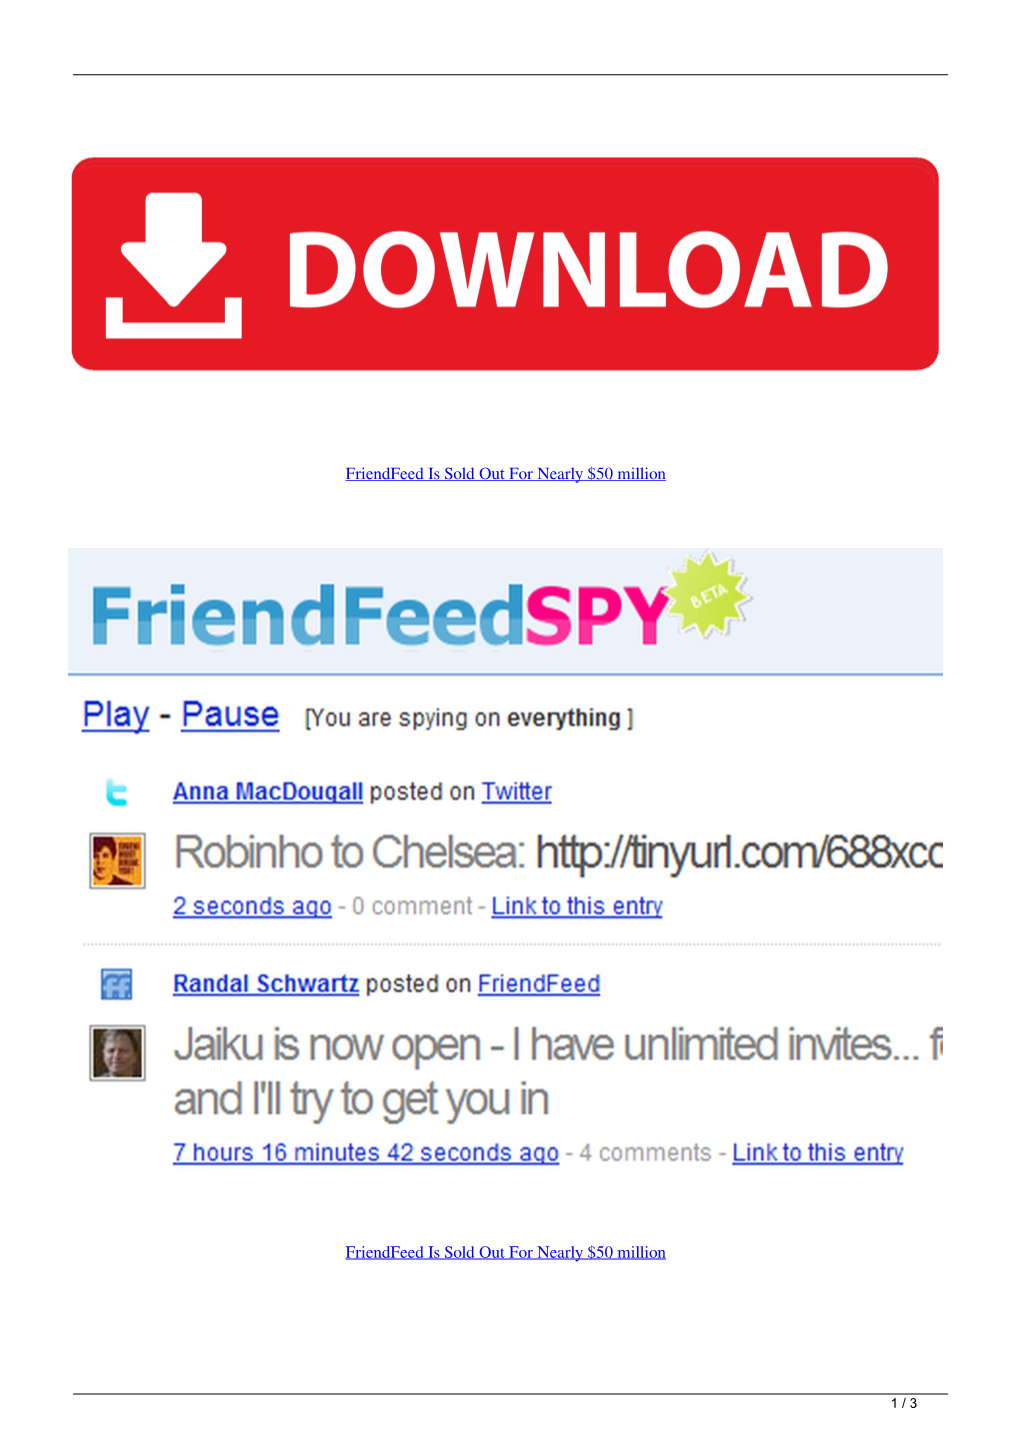 Friendfeed Is Sold out for Nearly 50Million